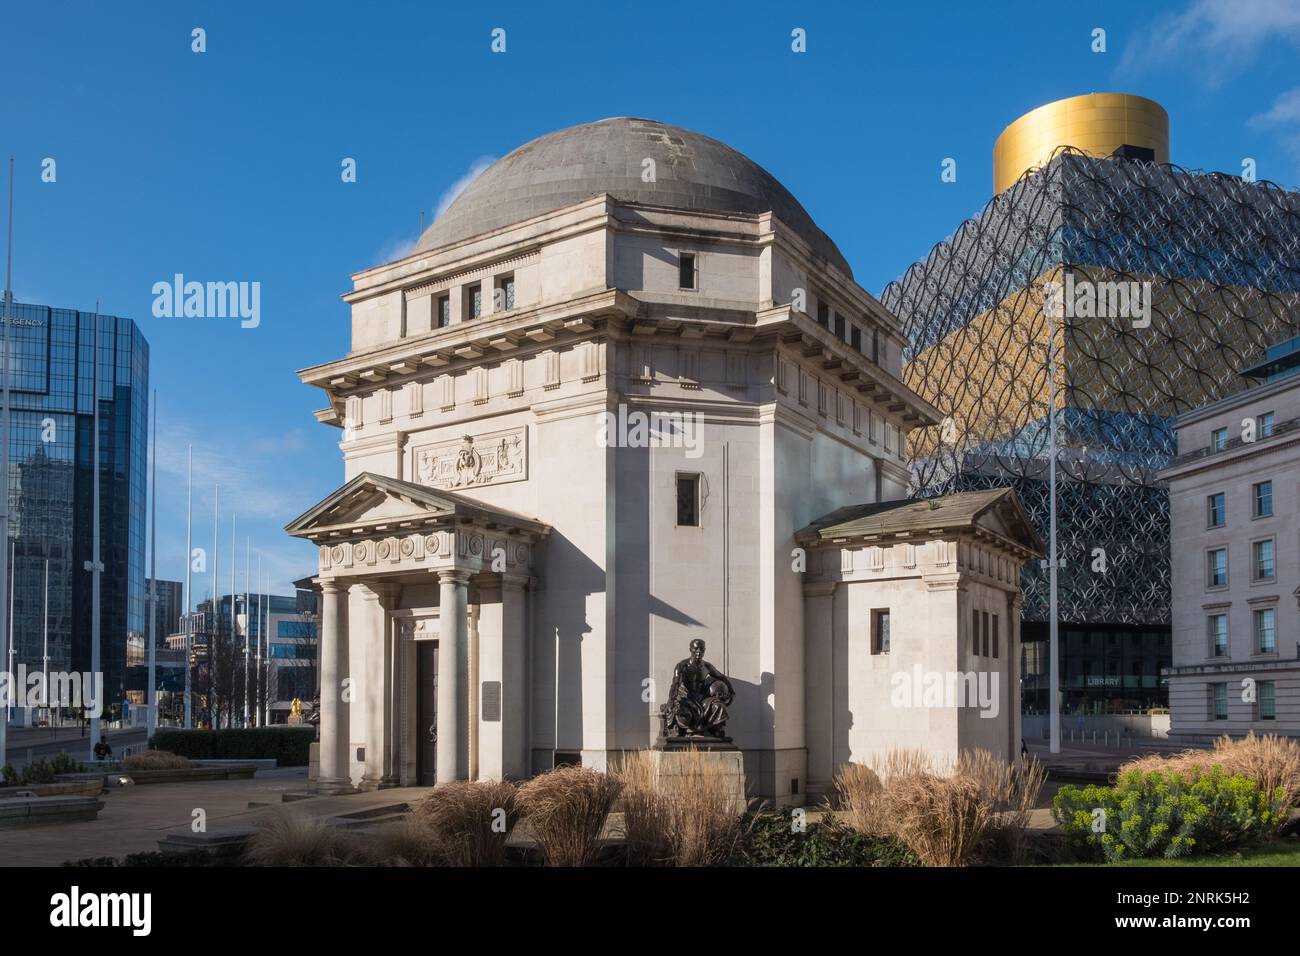 The Hall of Memory in Centenary Square, Birmingham is a war memorial built in 1925 to remember Birmingham citizens who died in WW! Stock Photo